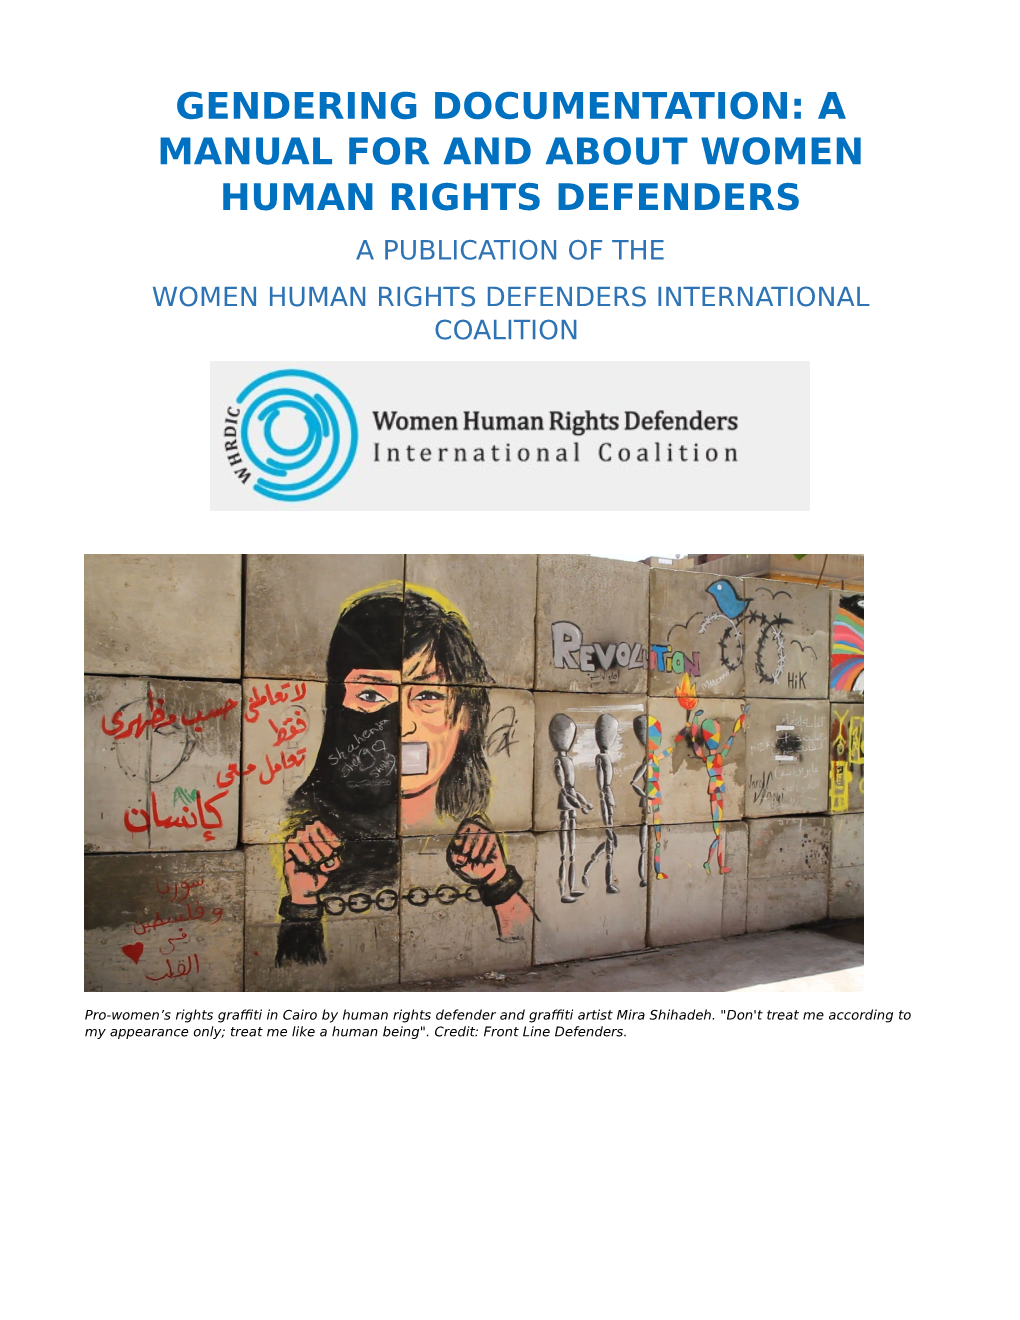 A Manual for and About Women Human Rights Defenders a Publication of the Women Human Rights Defenders International Coalition